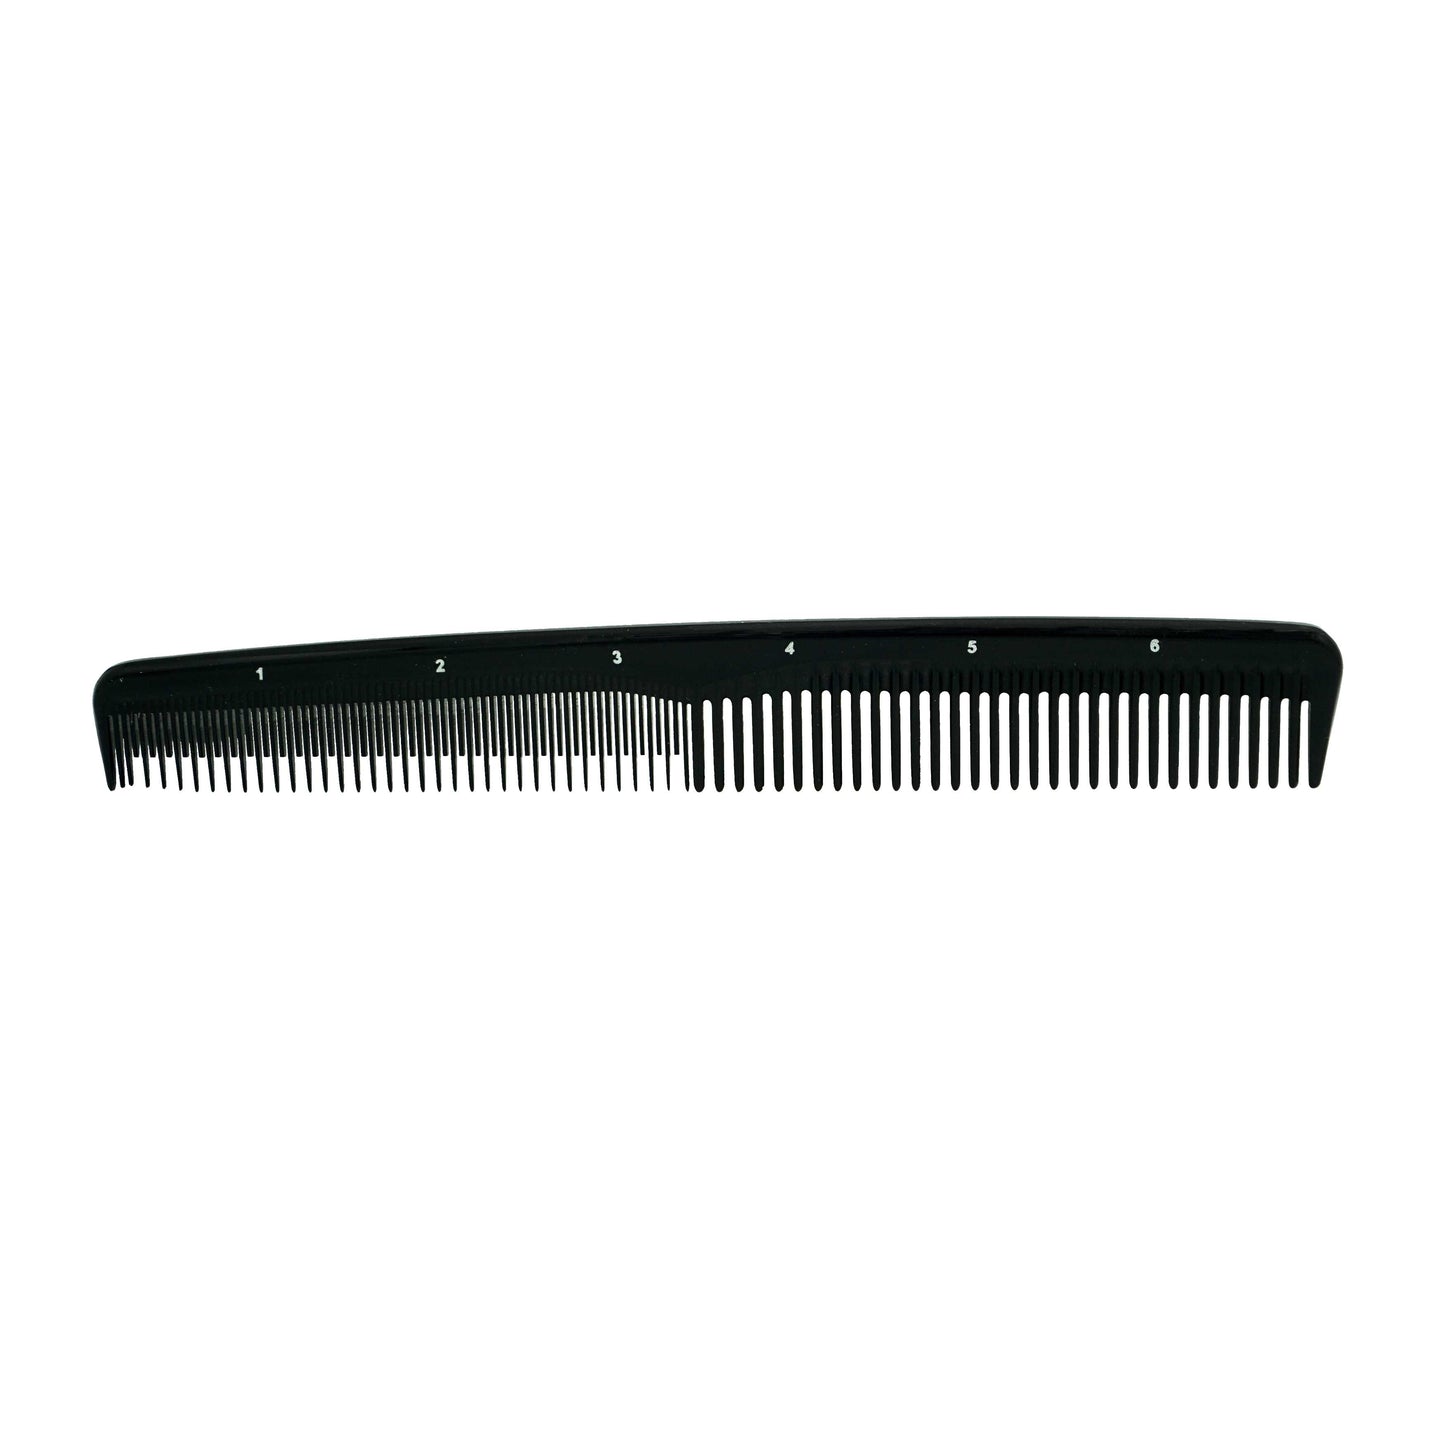 Pegasus 203, 7in Hard Rubber Hair Trimming/Cutting Tease Comb, Handmade, Seamless, Smooth Edges, Anti Static, Heat and Chemically Resistant, Everyday Grooming Comb | Peines de goma dura - Black